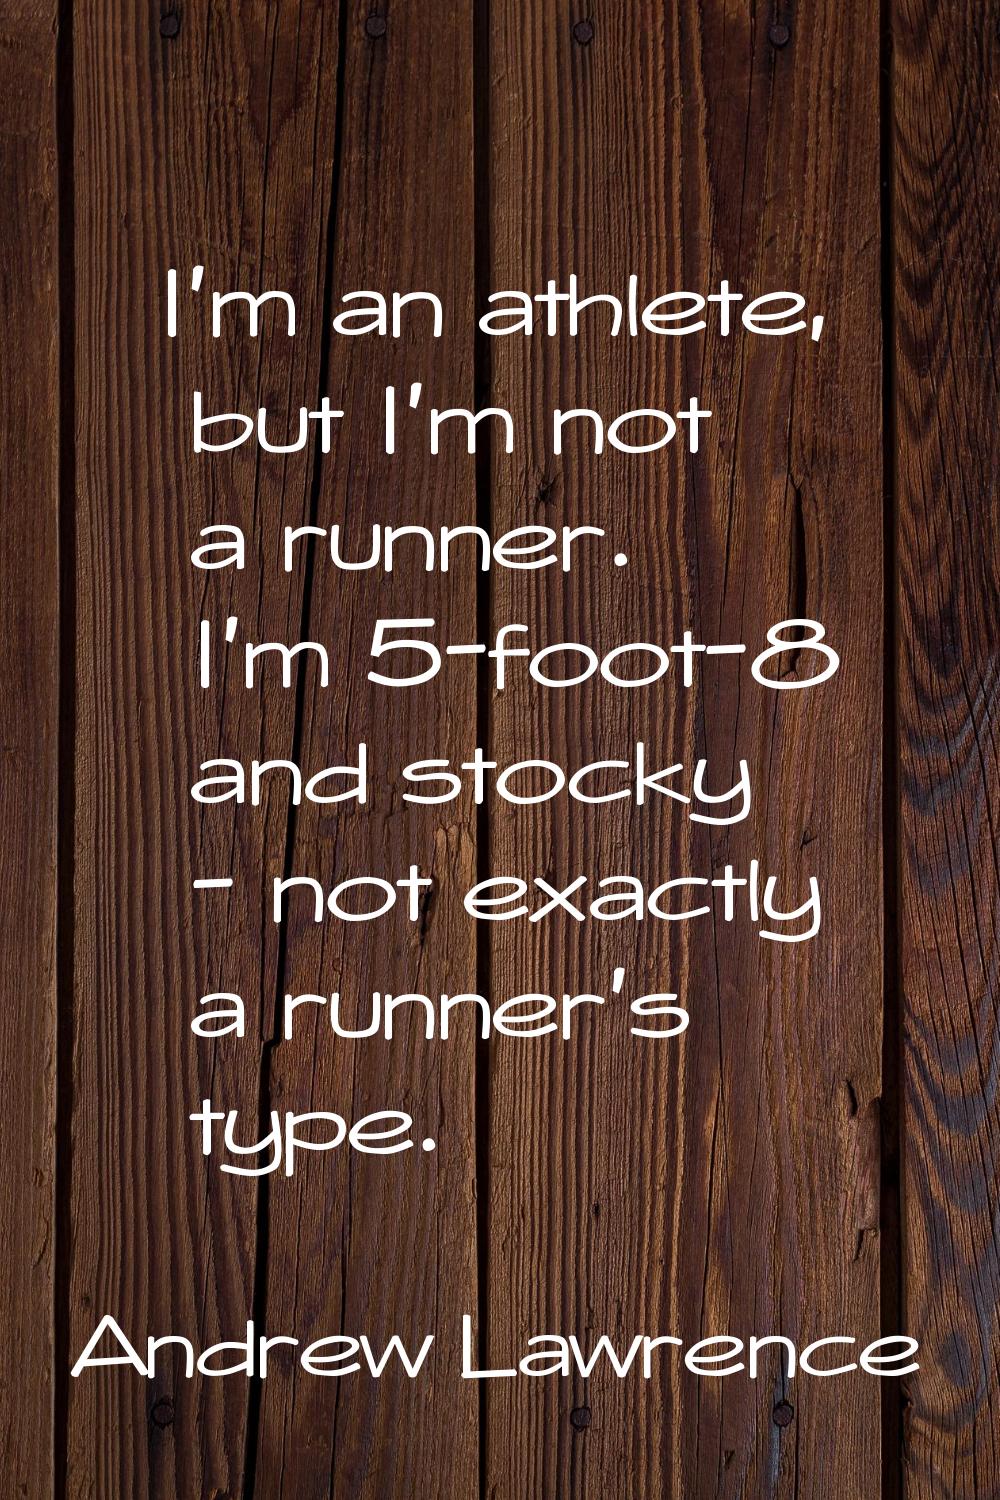 I'm an athlete, but I'm not a runner. I'm 5-foot-8 and stocky - not exactly a runner's type.